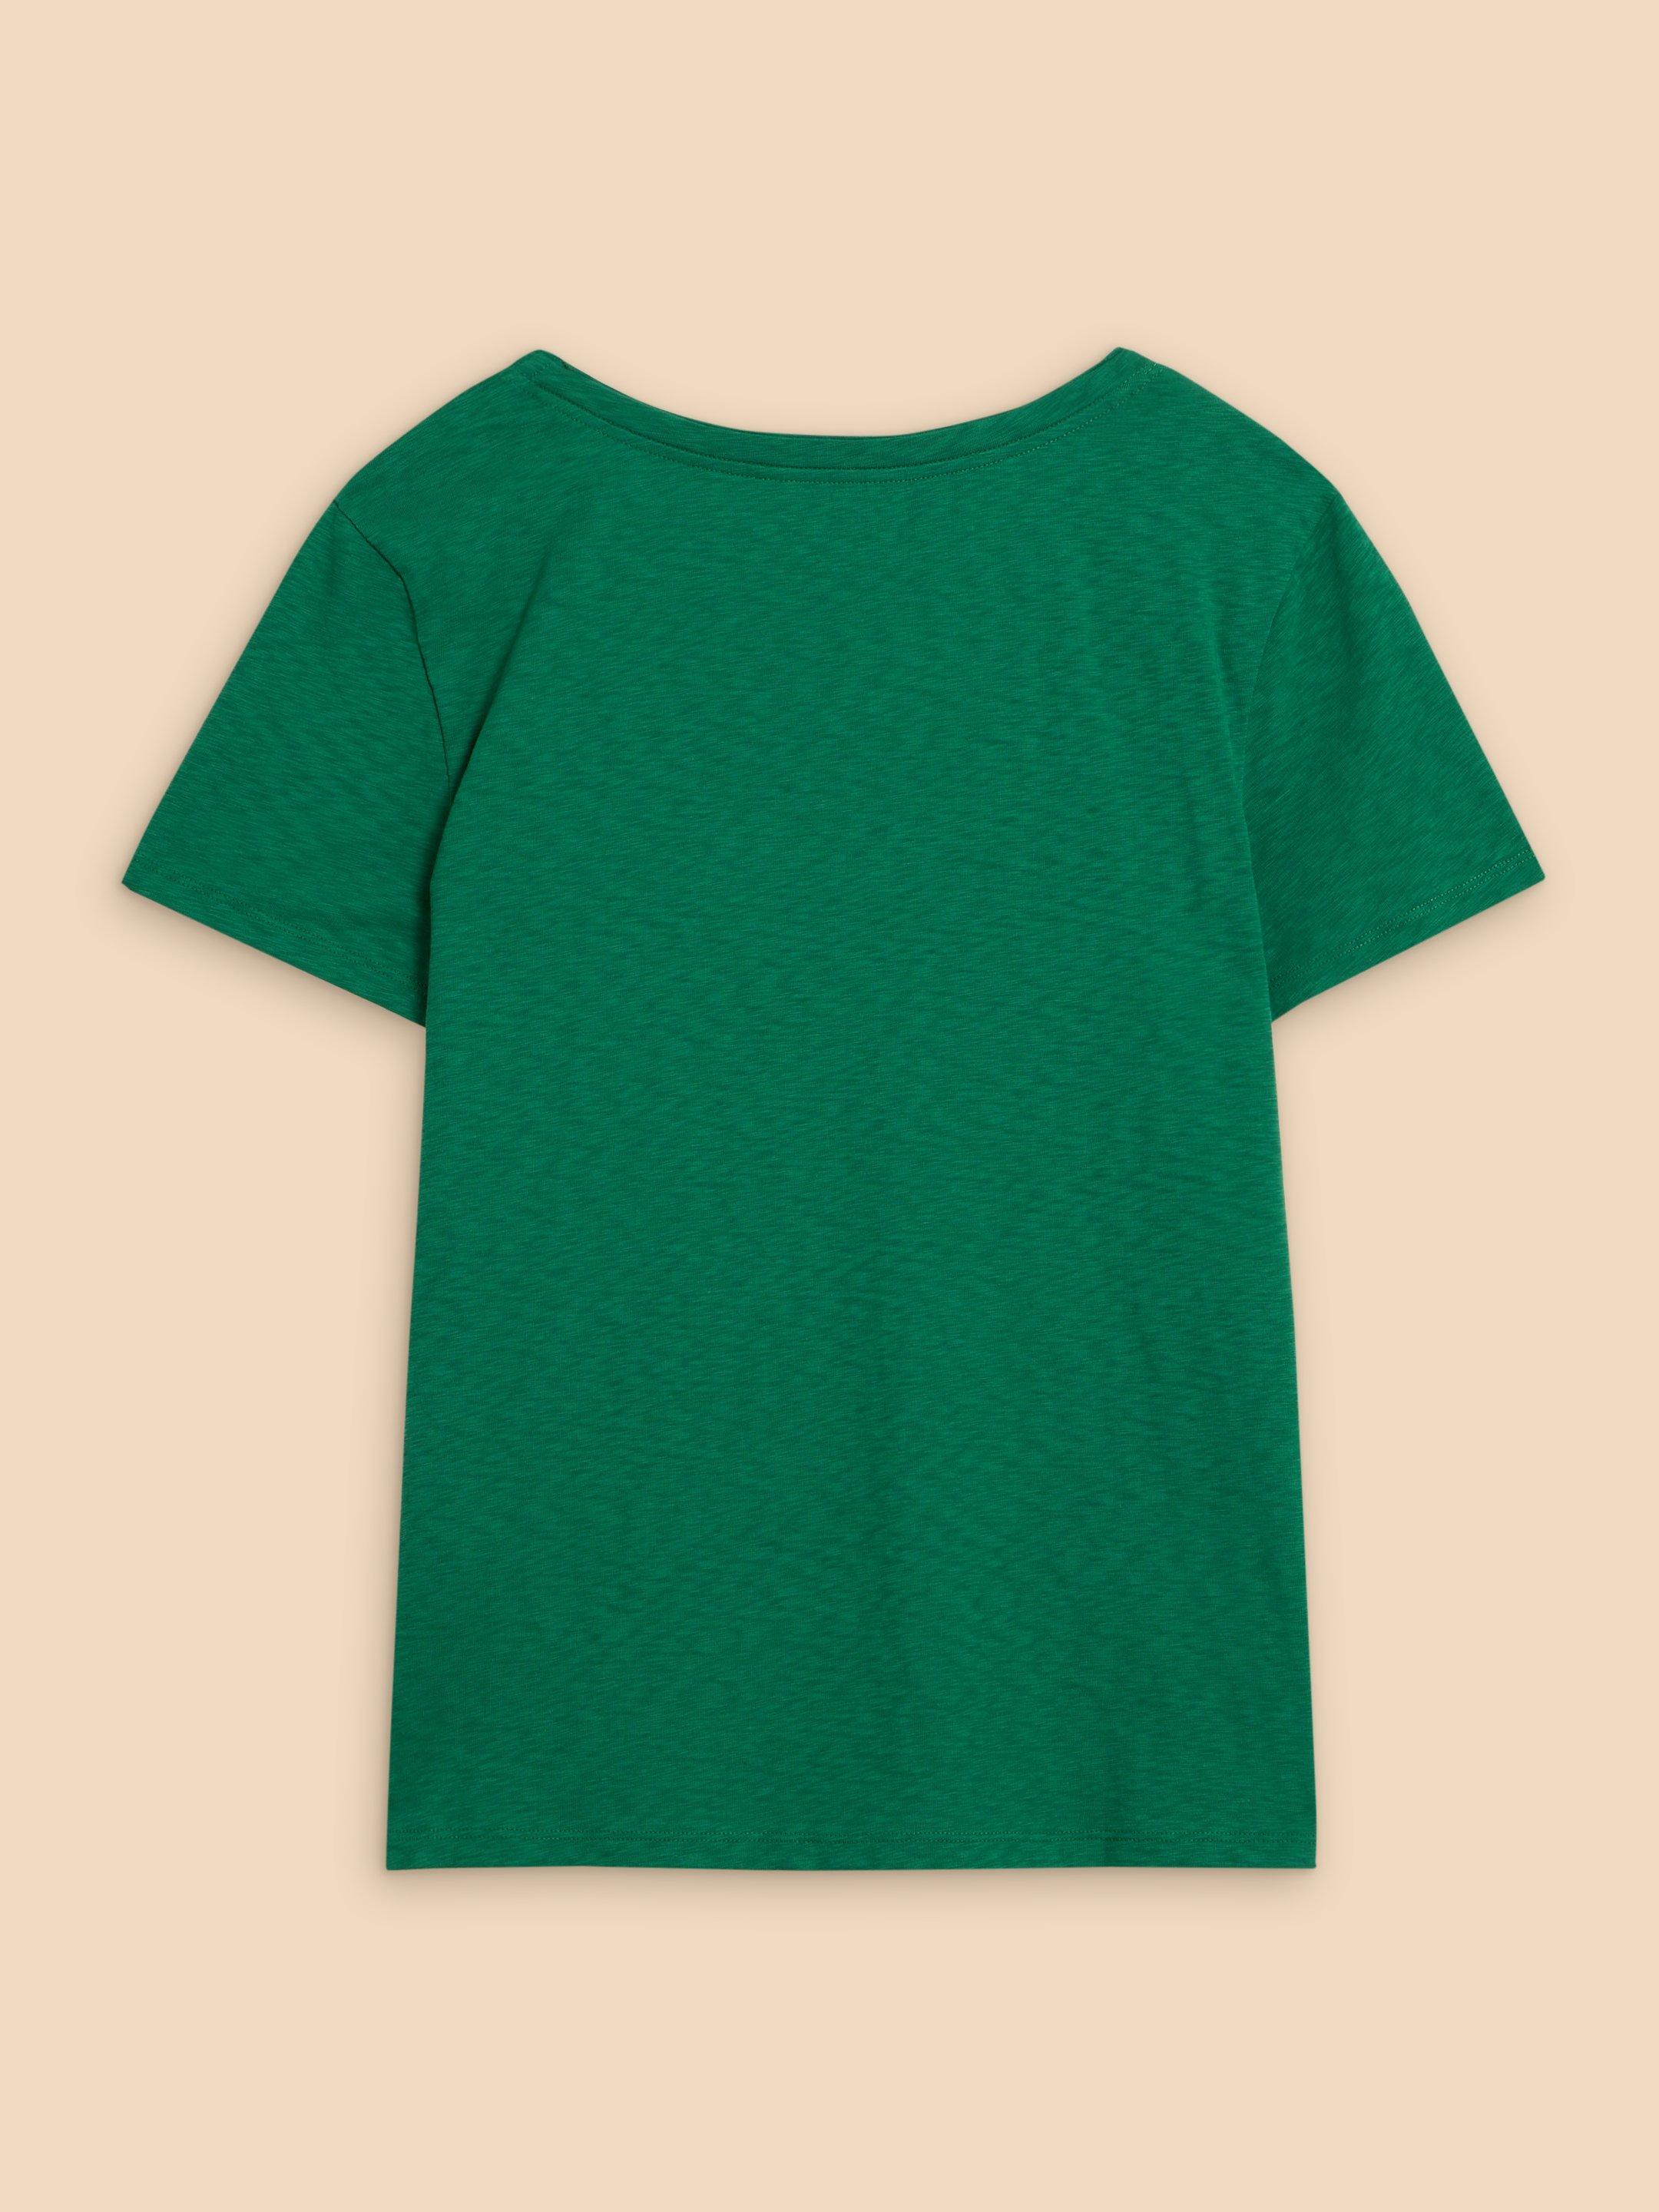 NADIA SS SCOOP NECK TEE in MID GREEN - FLAT BACK